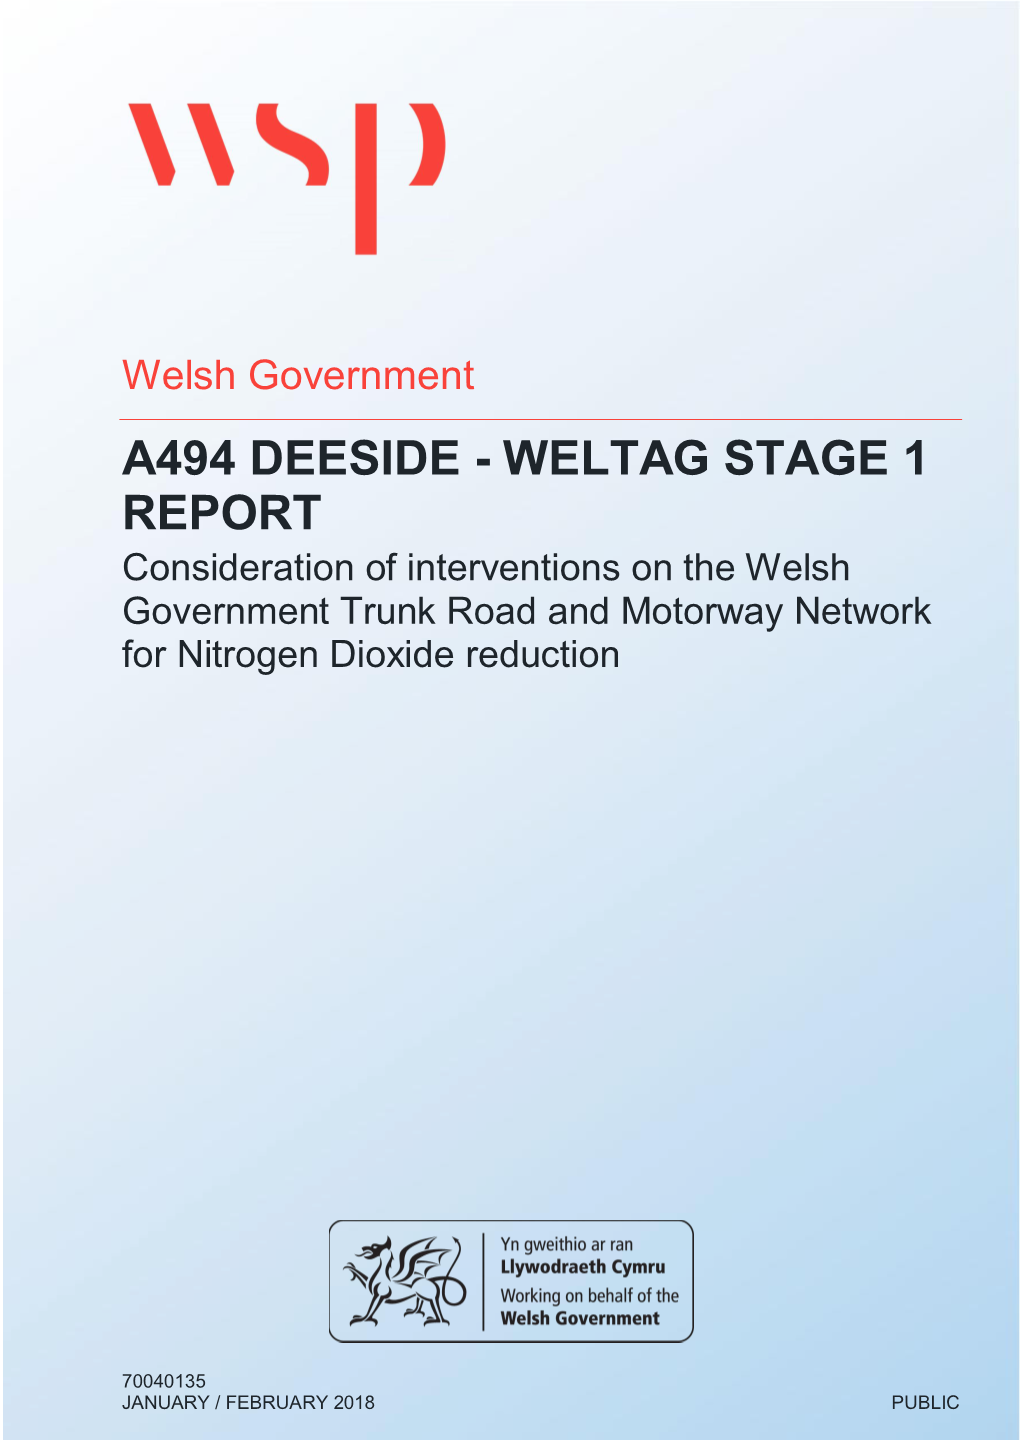 A494 DEESIDE - WELTAG STAGE 1 REPORT Consideration of Interventions on the Welsh Government Trunk Road and Motorway Network for Nitrogen Dioxide Reduction